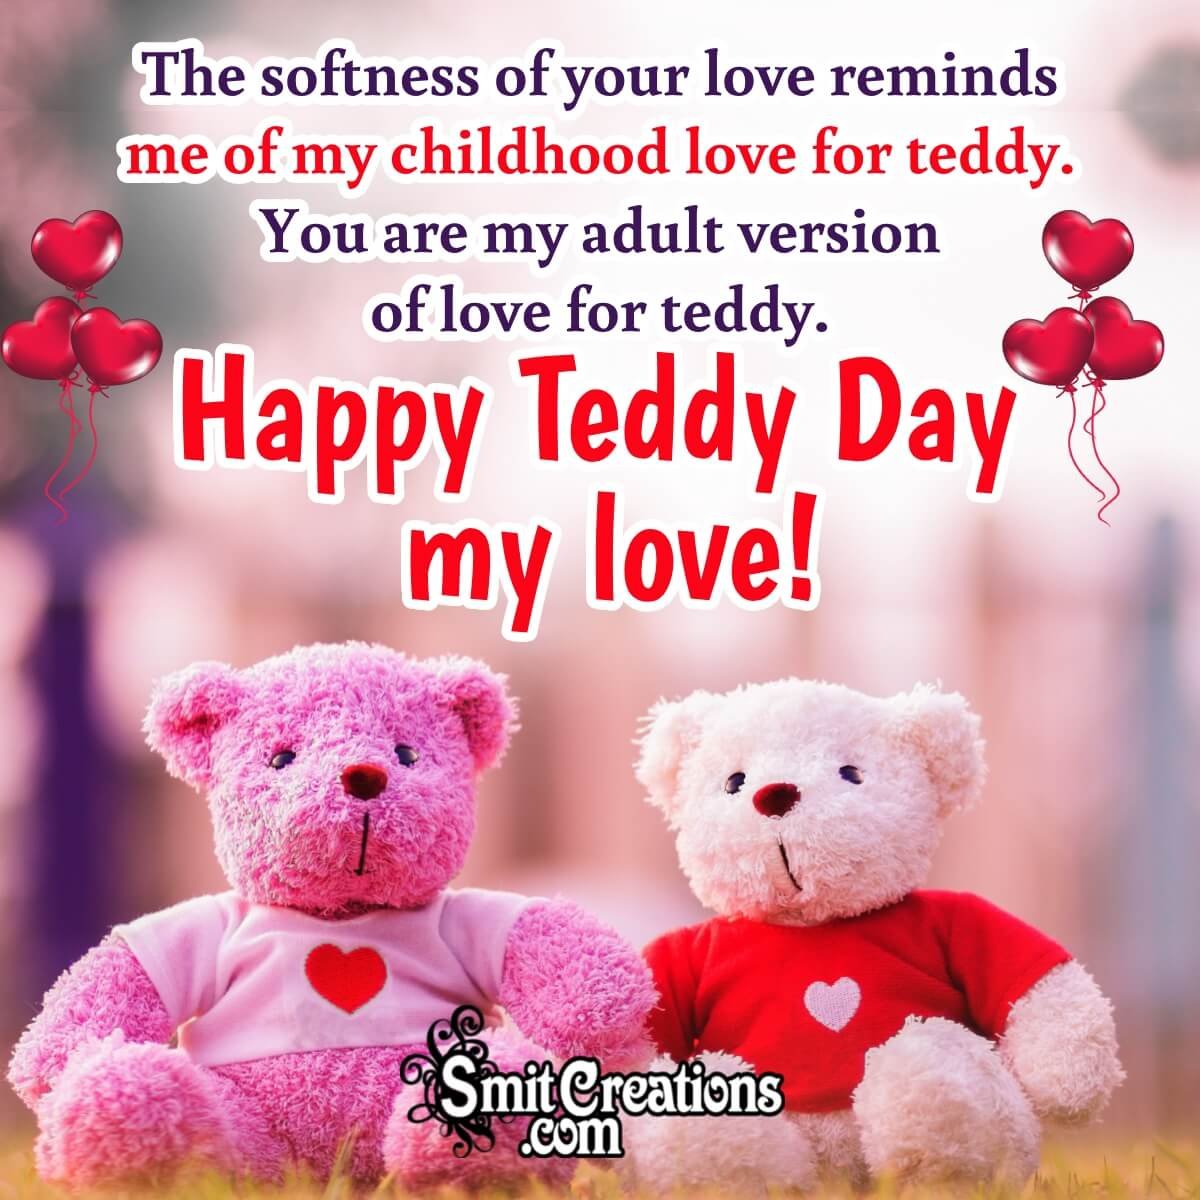 Happy Teddy Bear Day Wishes For Love